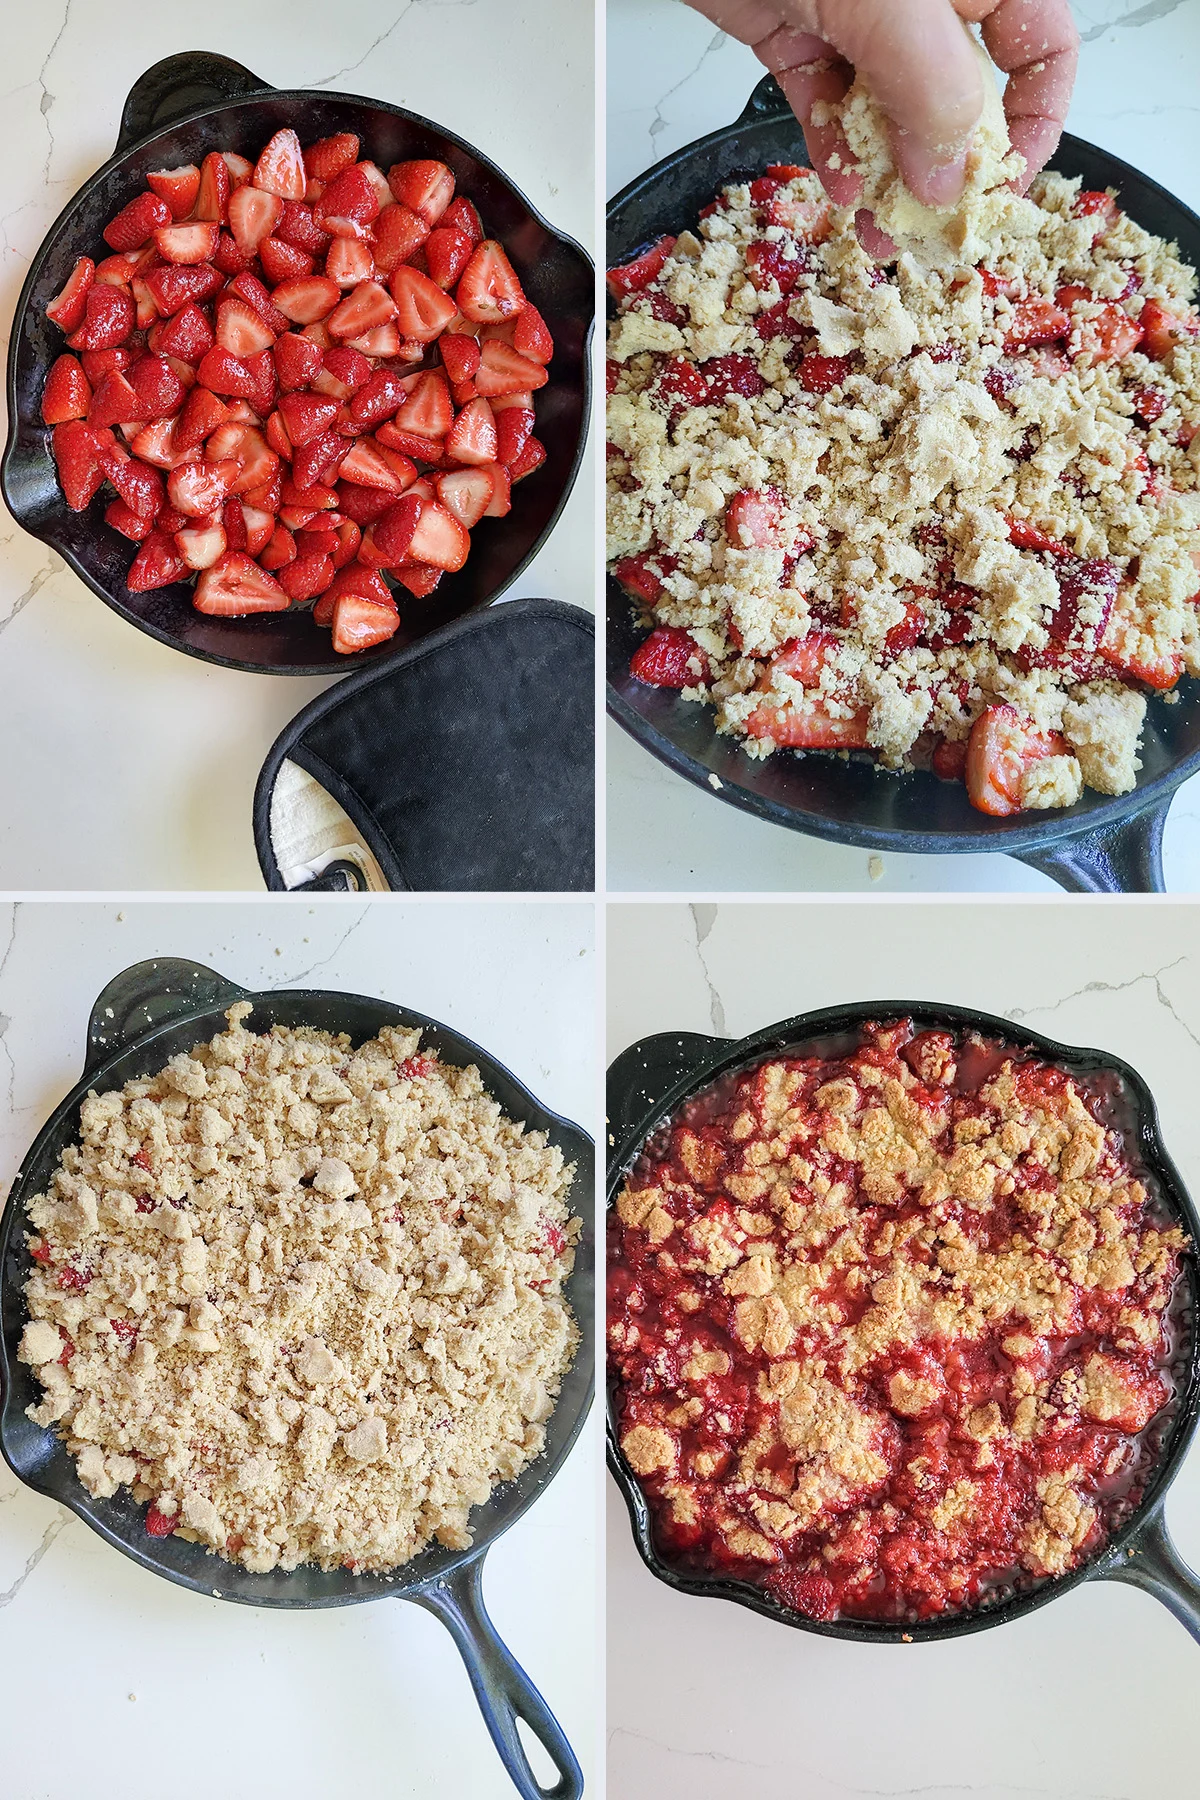 A cast iron skillet with strawberries, crumble topping before and after baking.